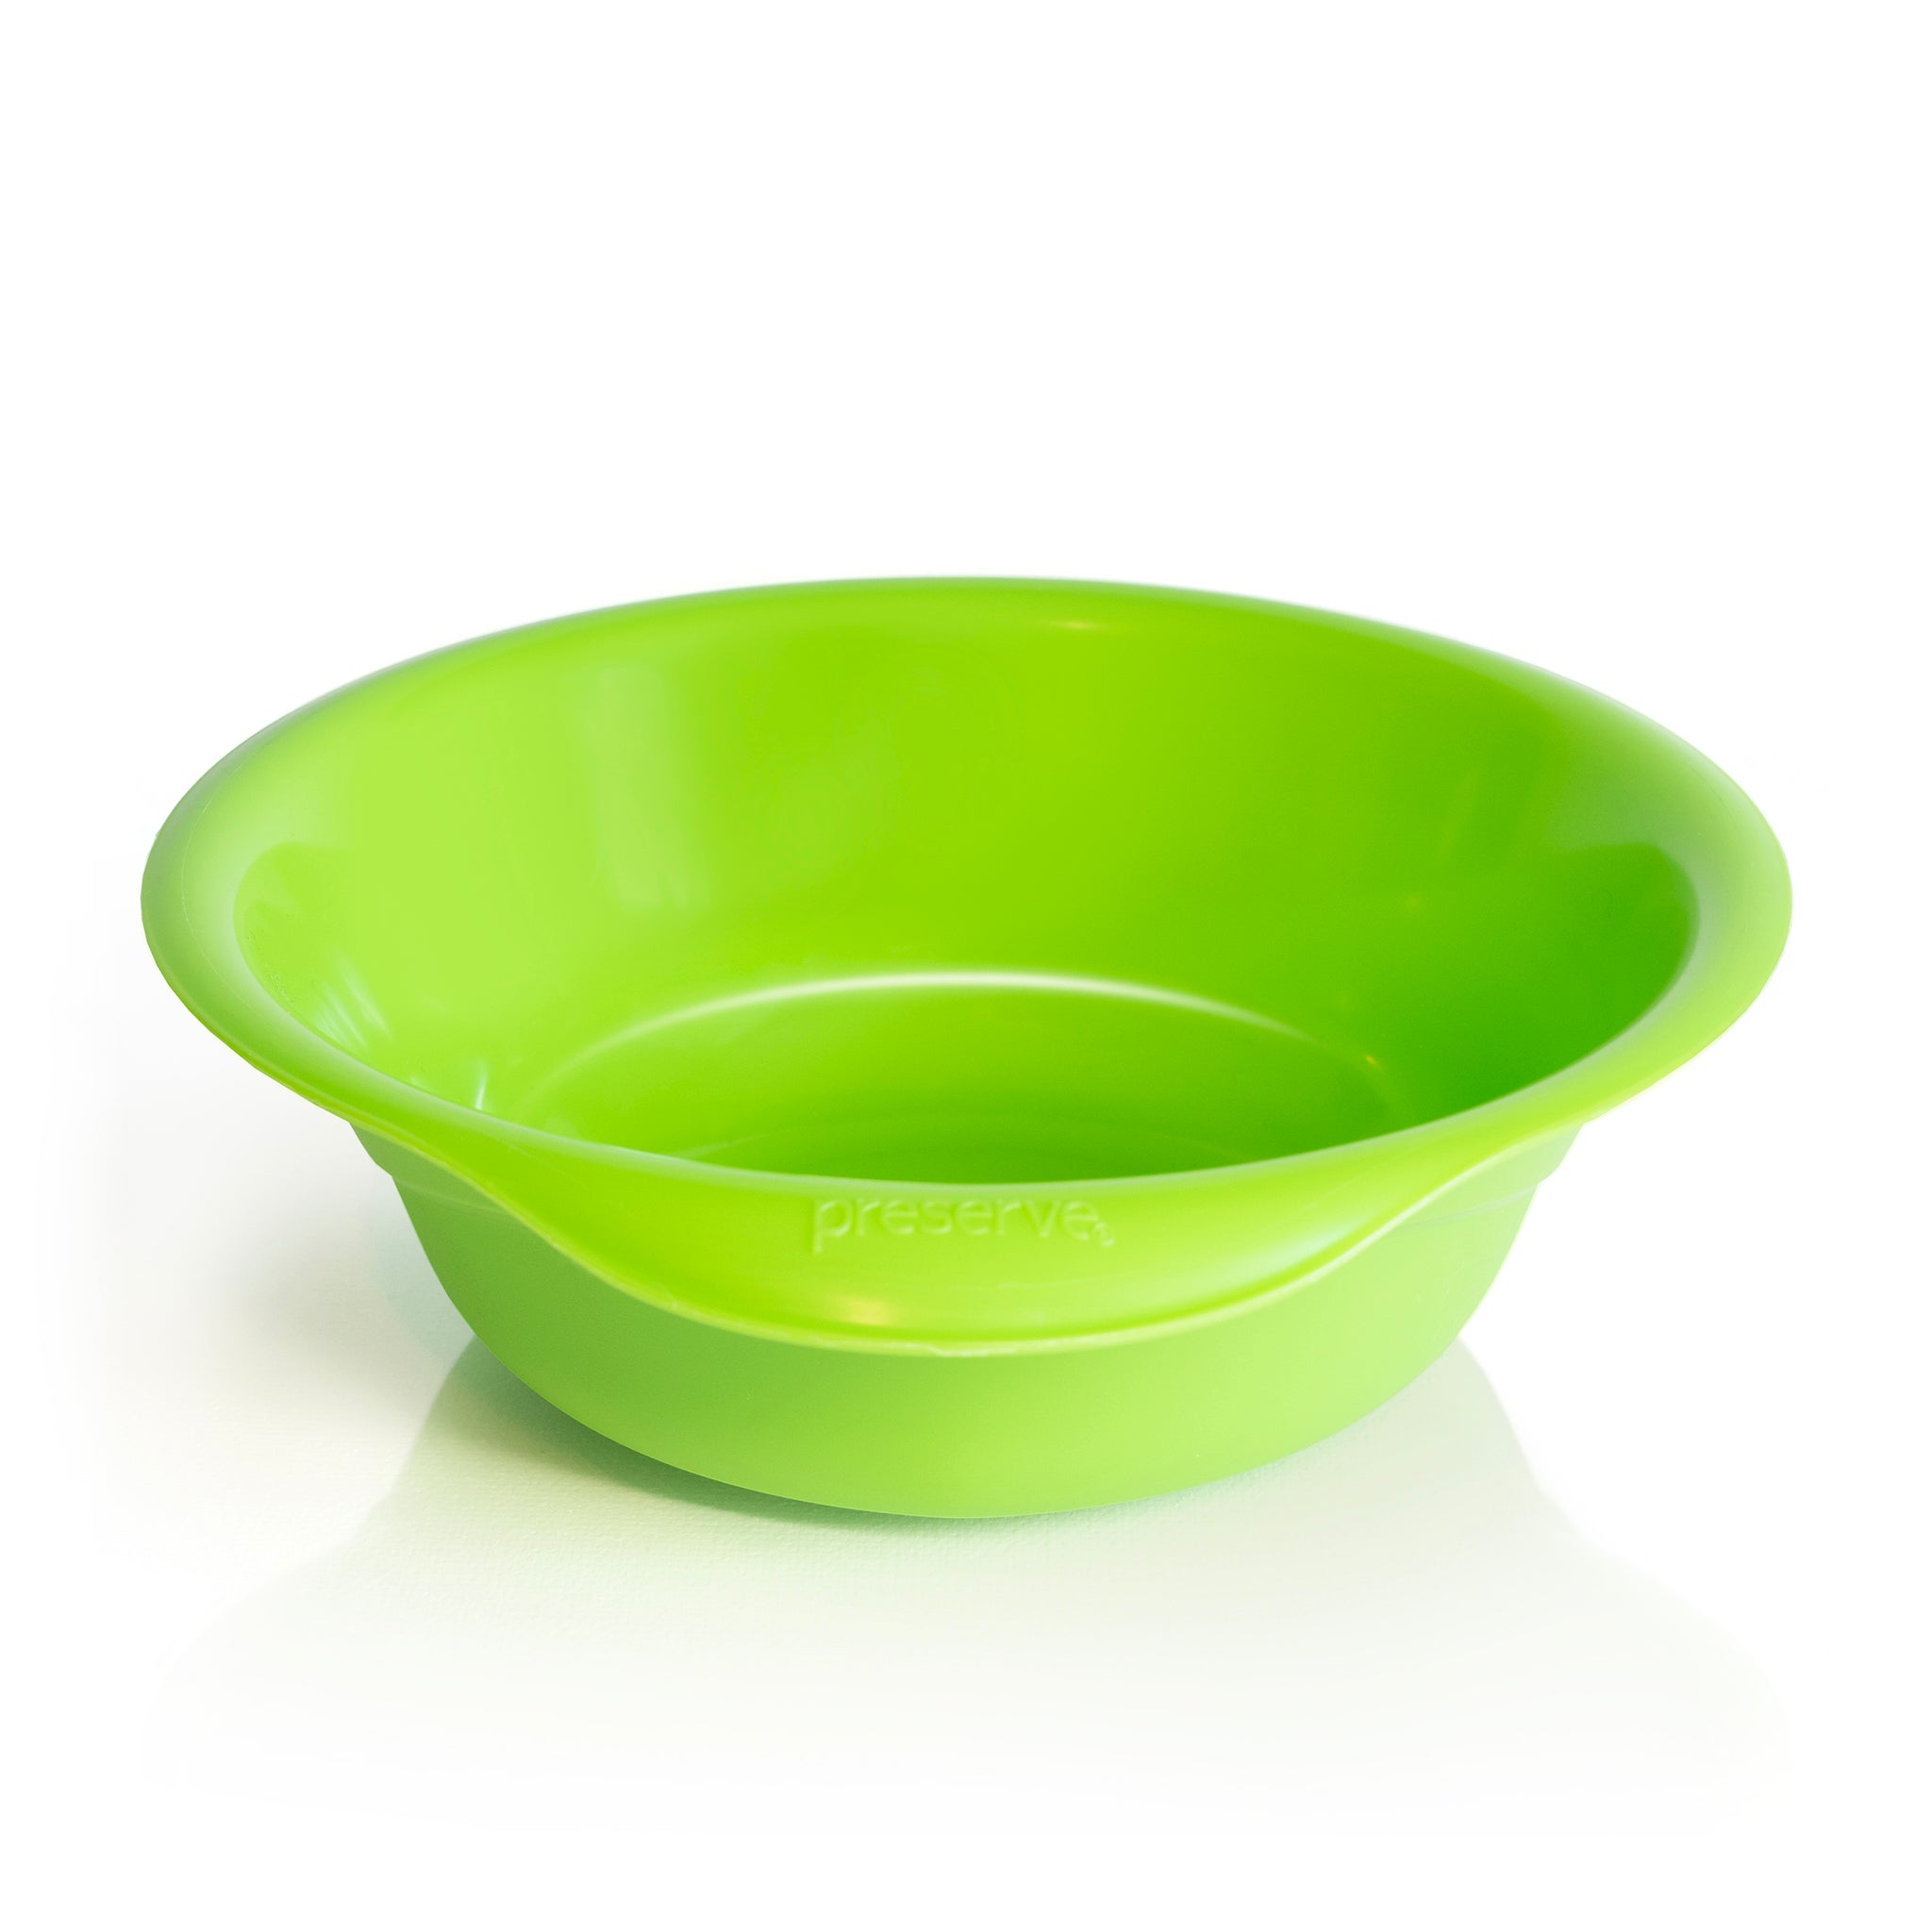 Apple green recycled plastic bowl